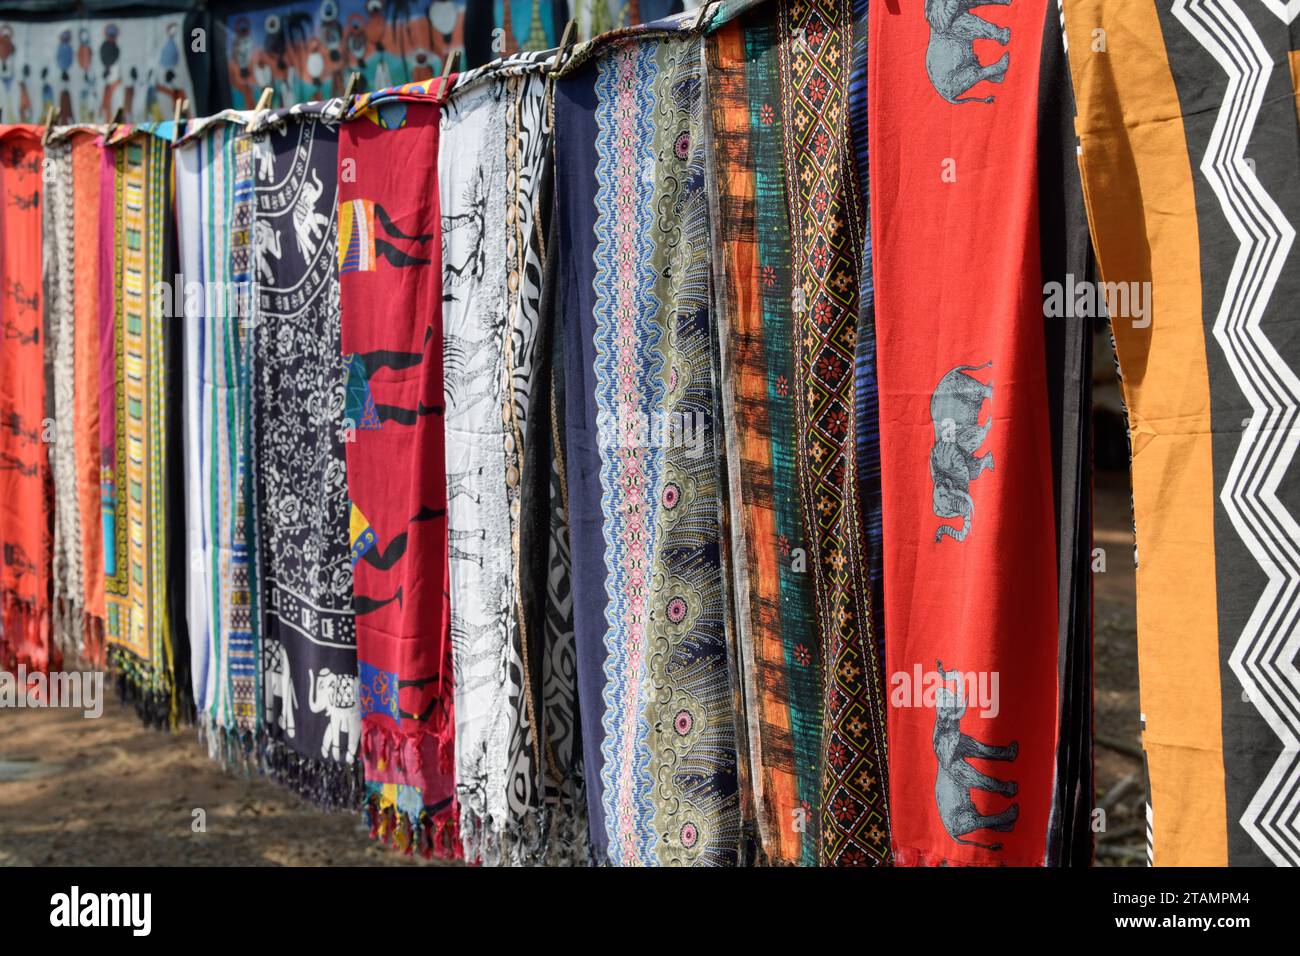 Beautiful printed table cloths hanging in row, curios for sale at Swazi Candles traditional African art market, Eswatini Swaziland, travel shopping Stock Photo